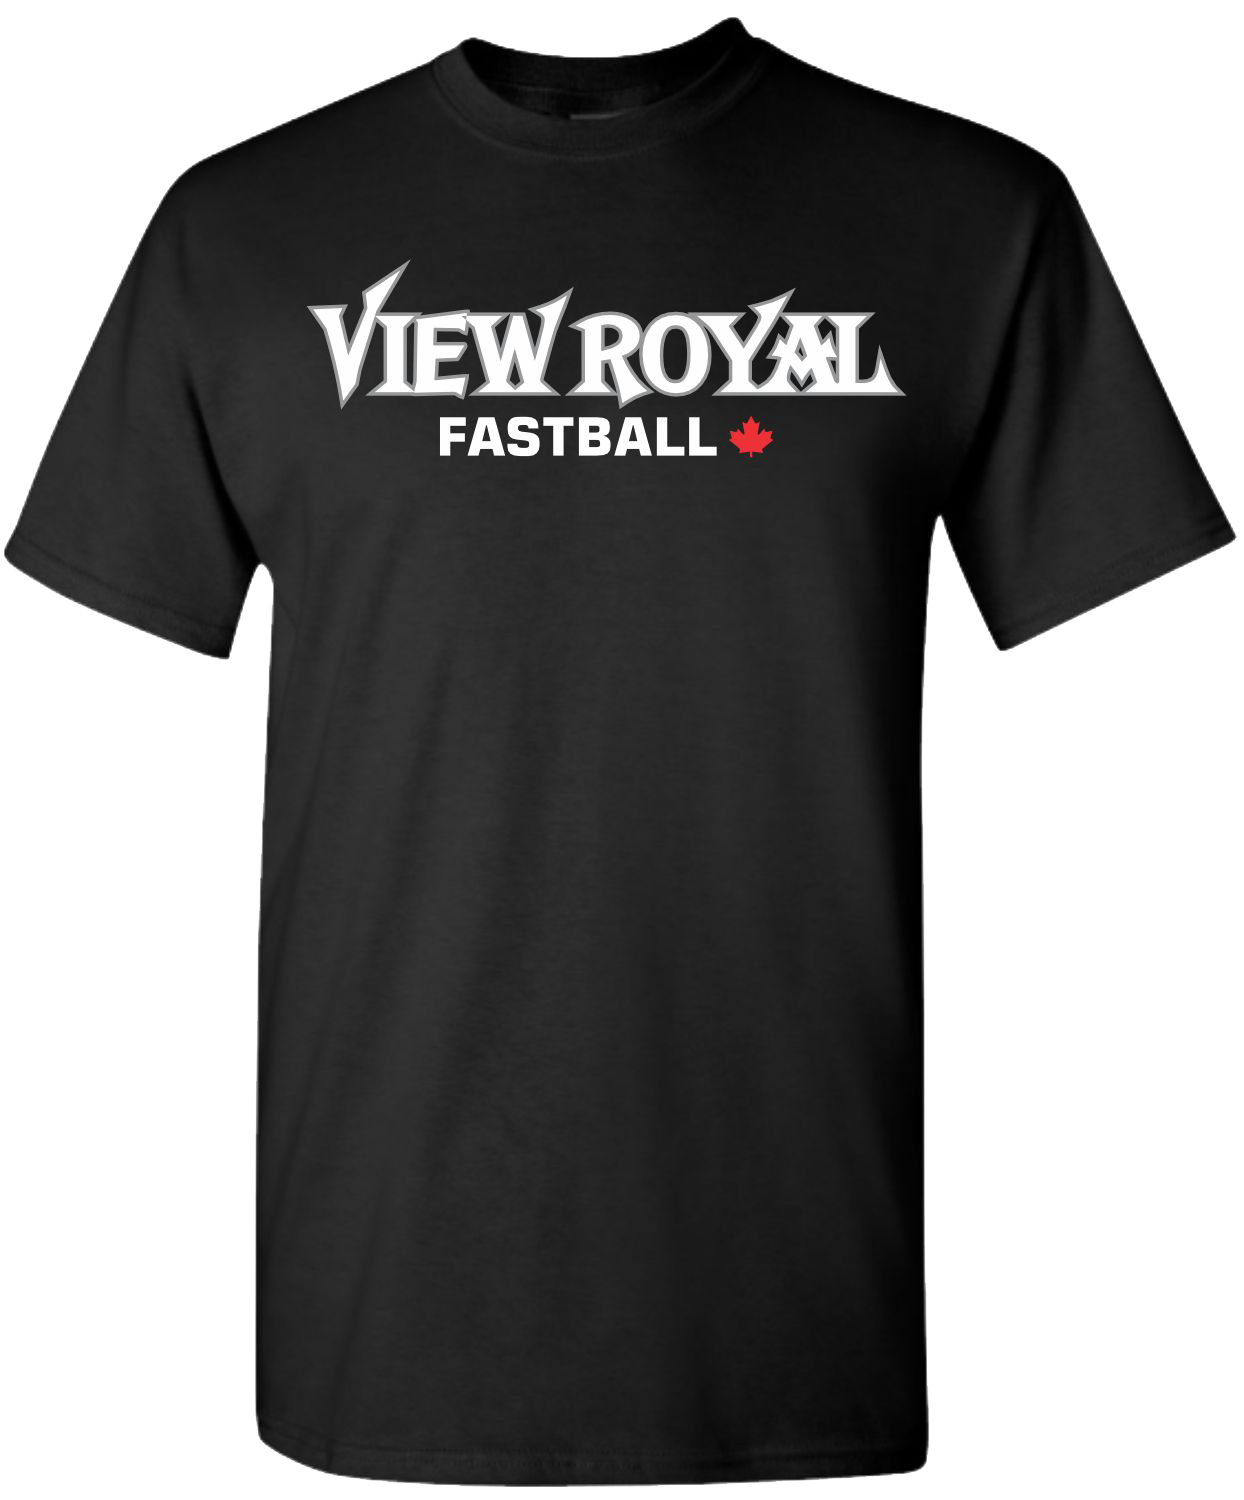 View Royal Fastball Unisex and Youth Cotton Tshirts